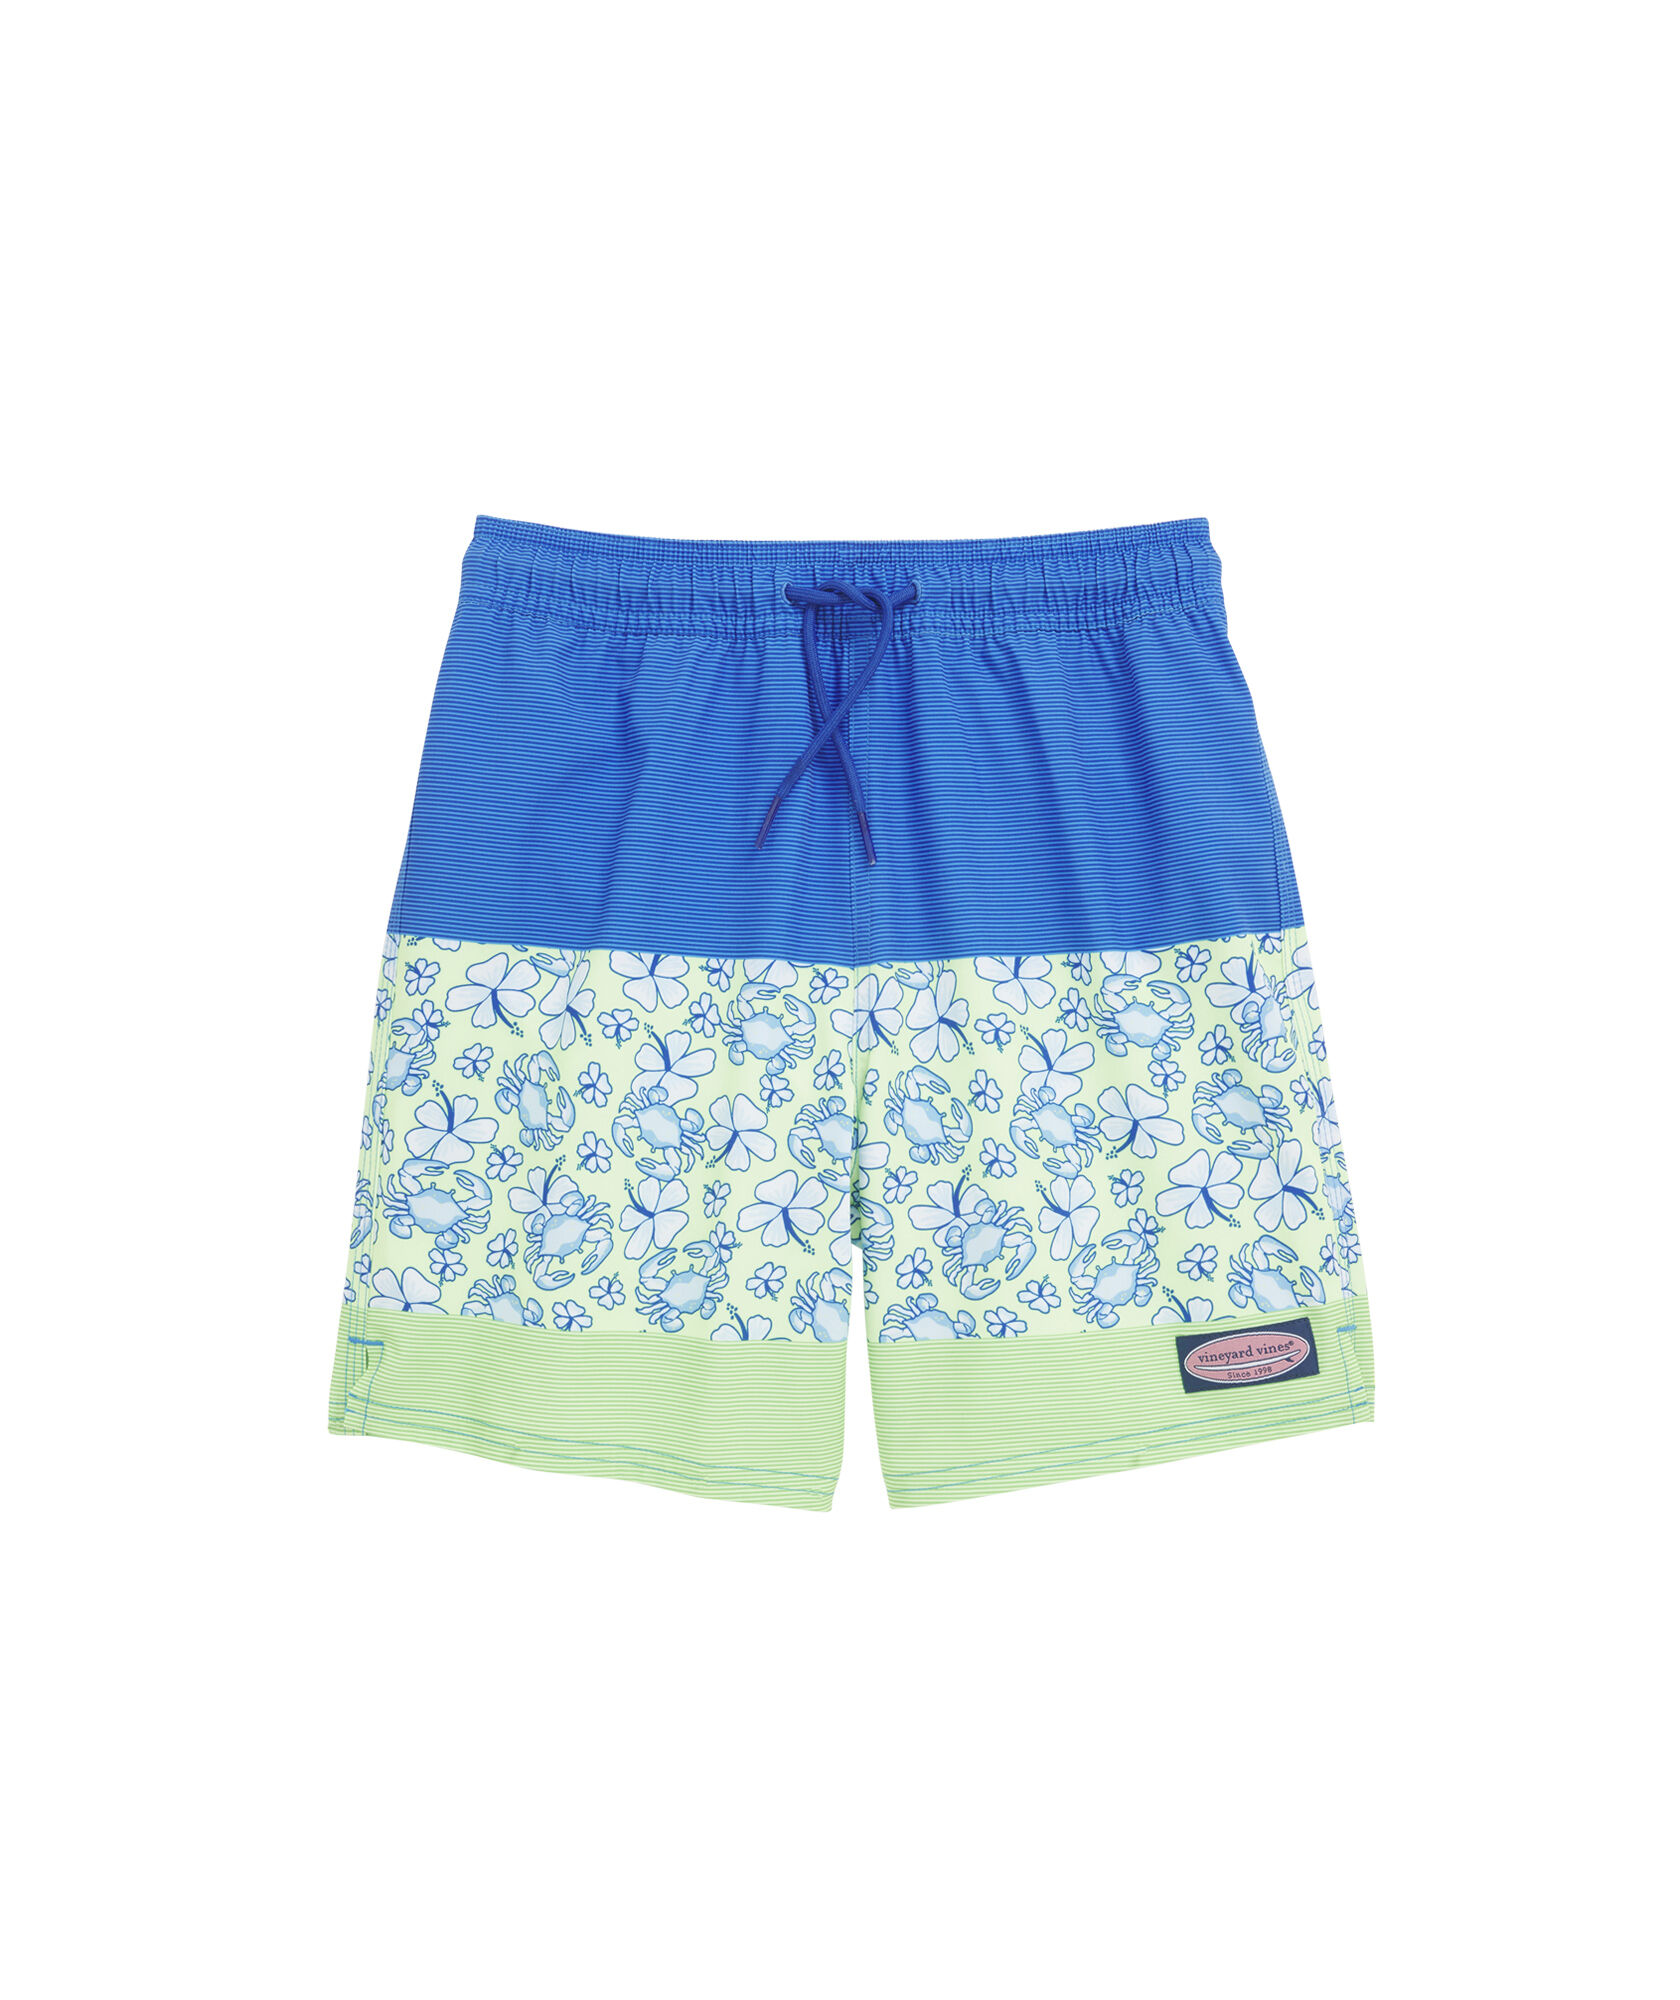 OUTLET Boys' Vintage Crab Striped Chappy Trunks